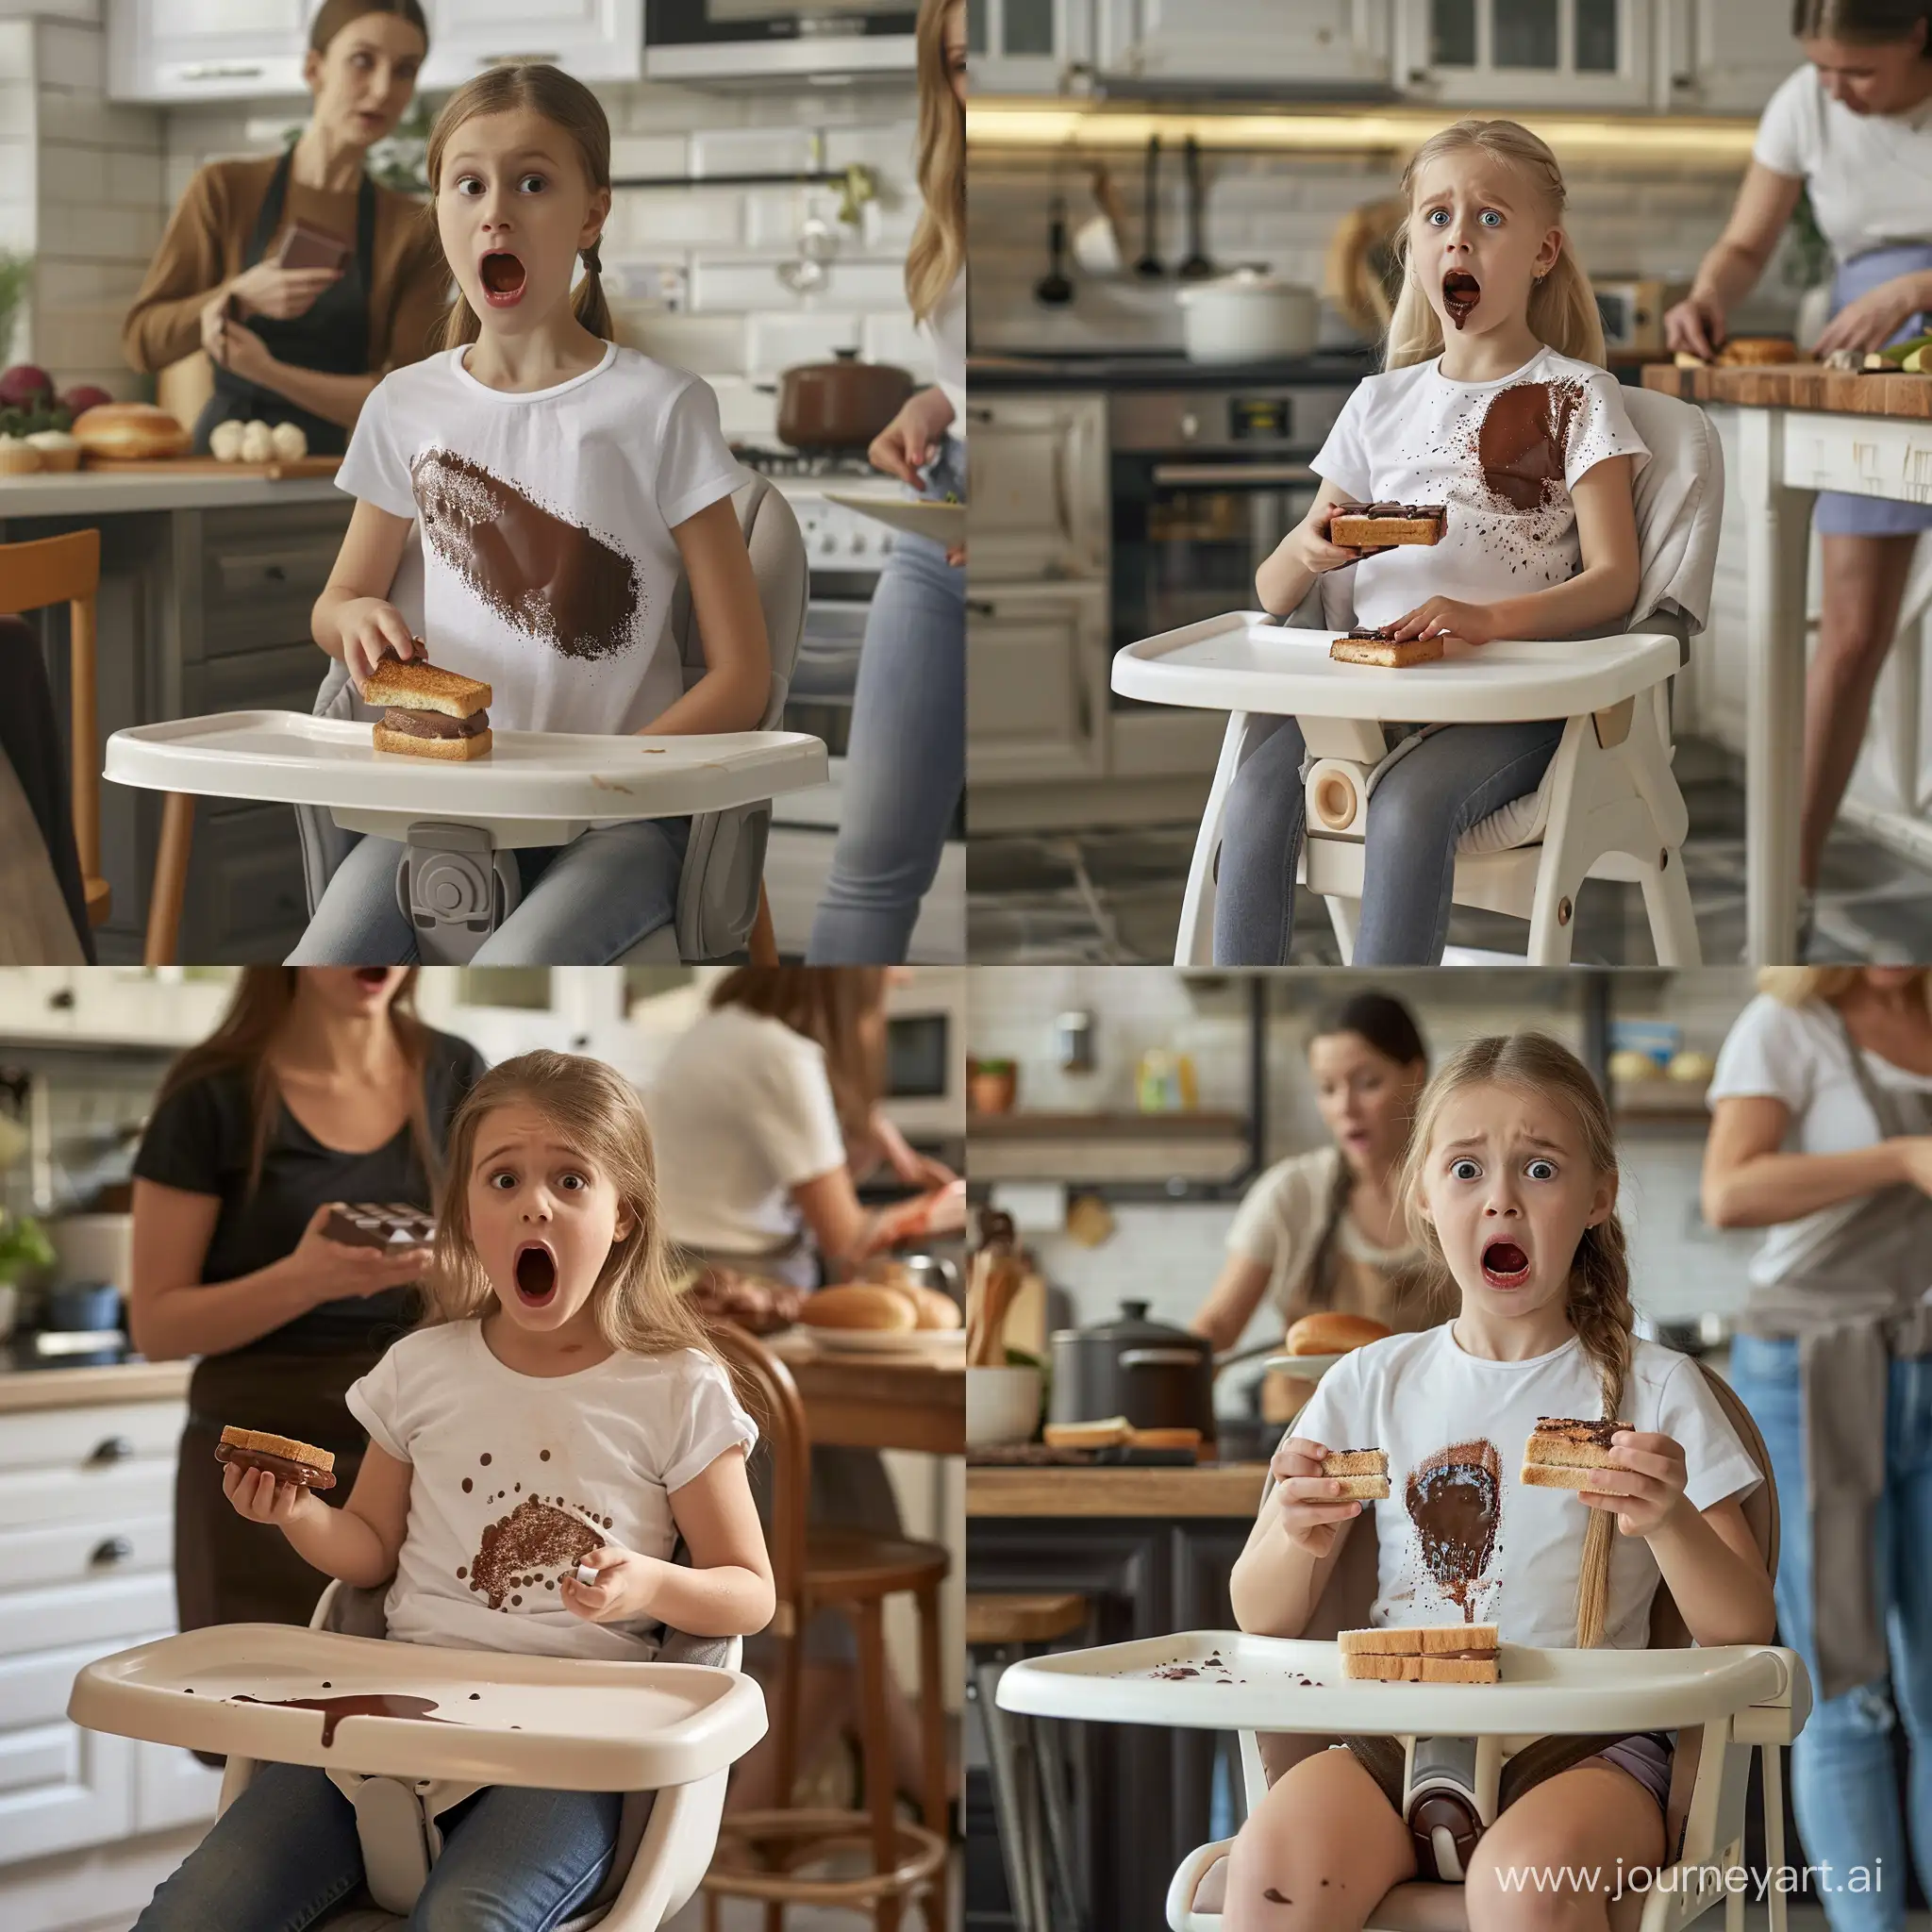 young girl sitting on highchair in kitchen, holding chocolate sandwich, a chocolate stain is on the girl's t-shirt, the girl is shocked,  mother is cooking on the other side, 